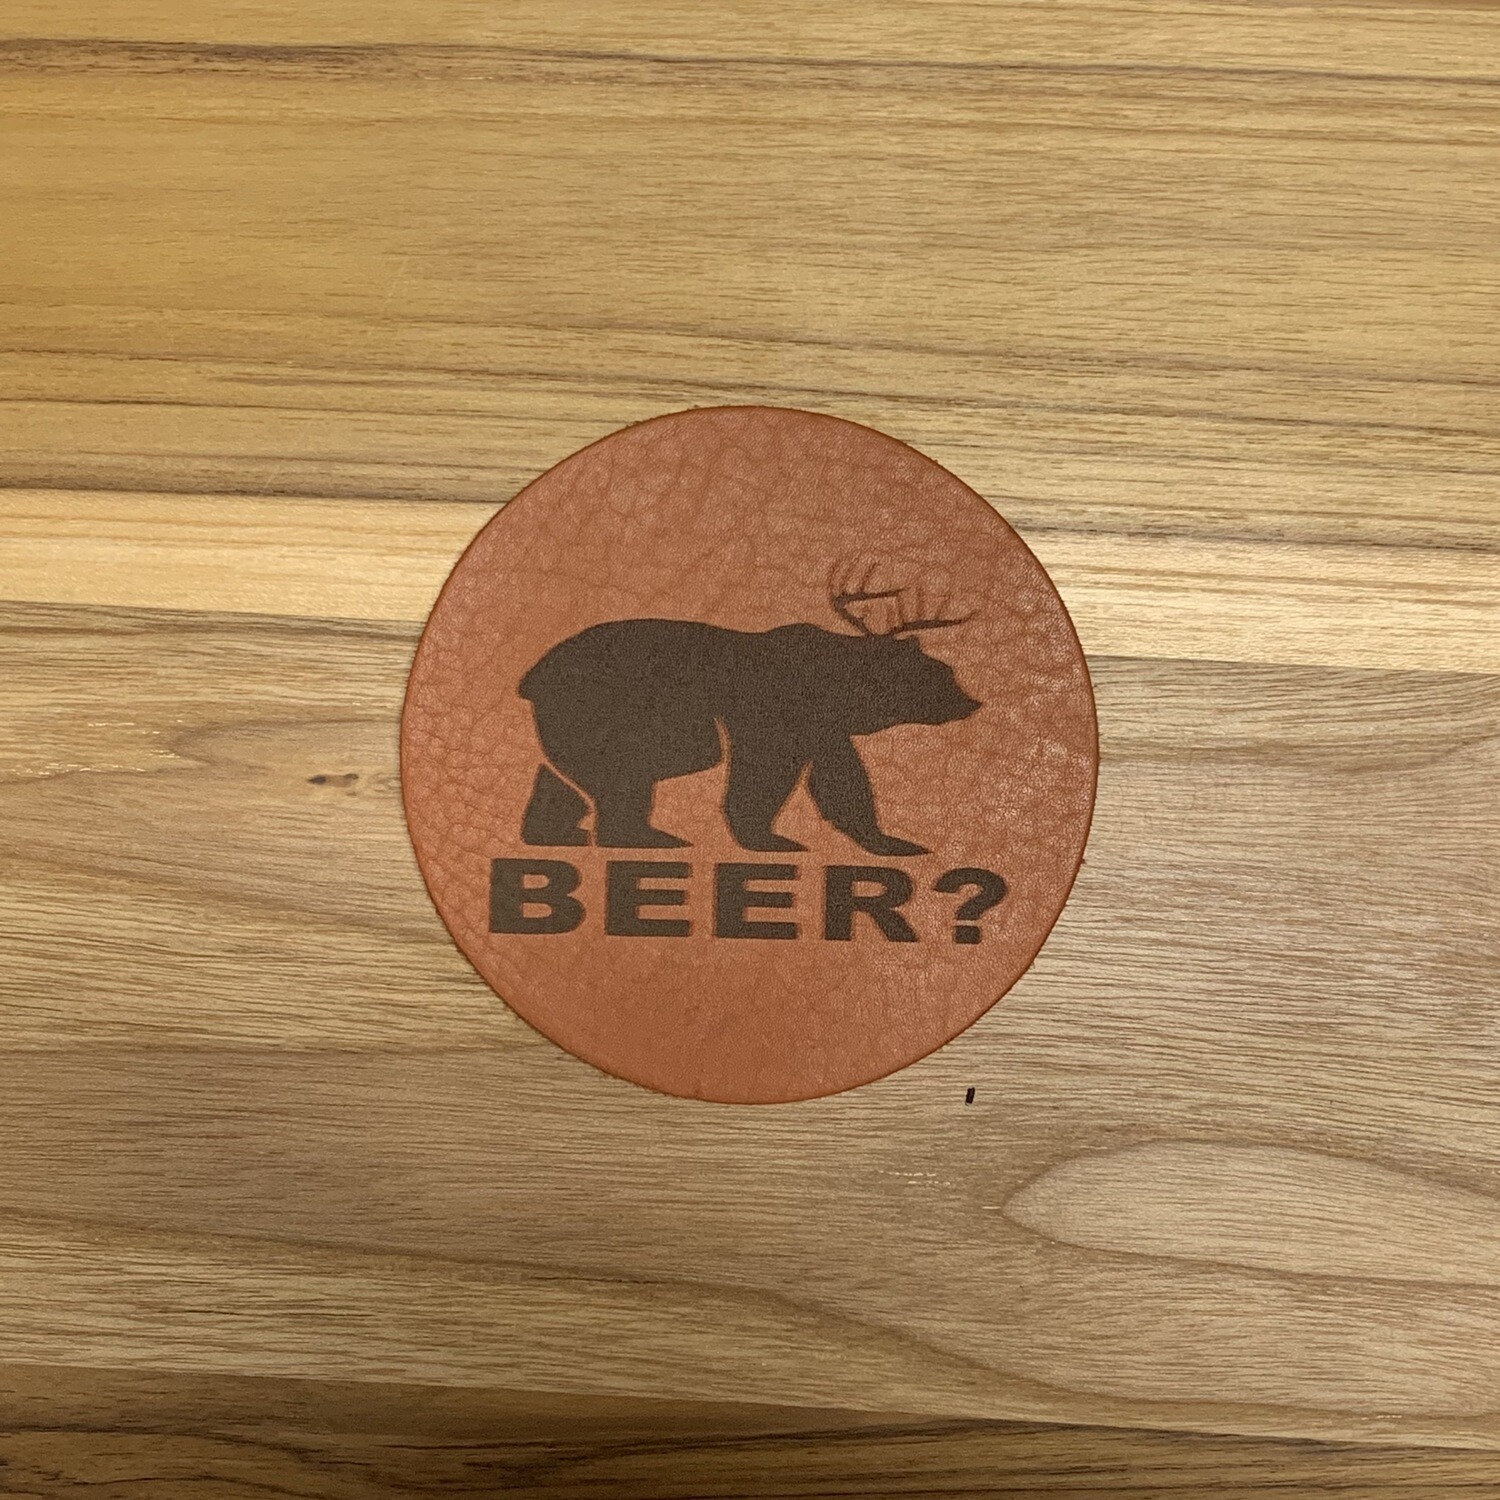 BEER? - Leather Coasters